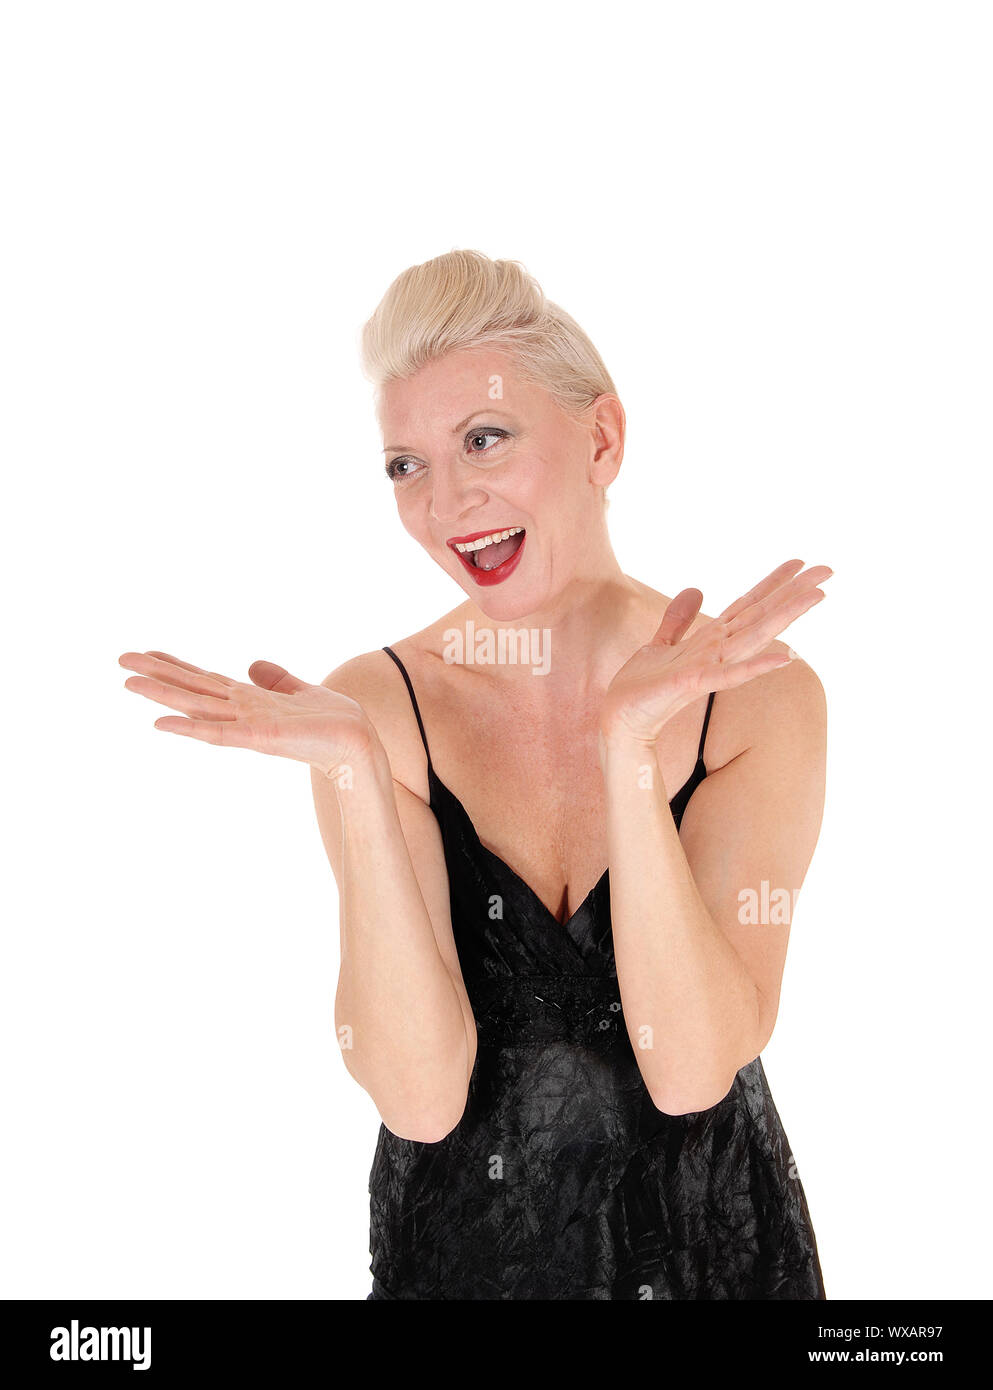 A happy laughing blond woman with her hands up Stock Photo